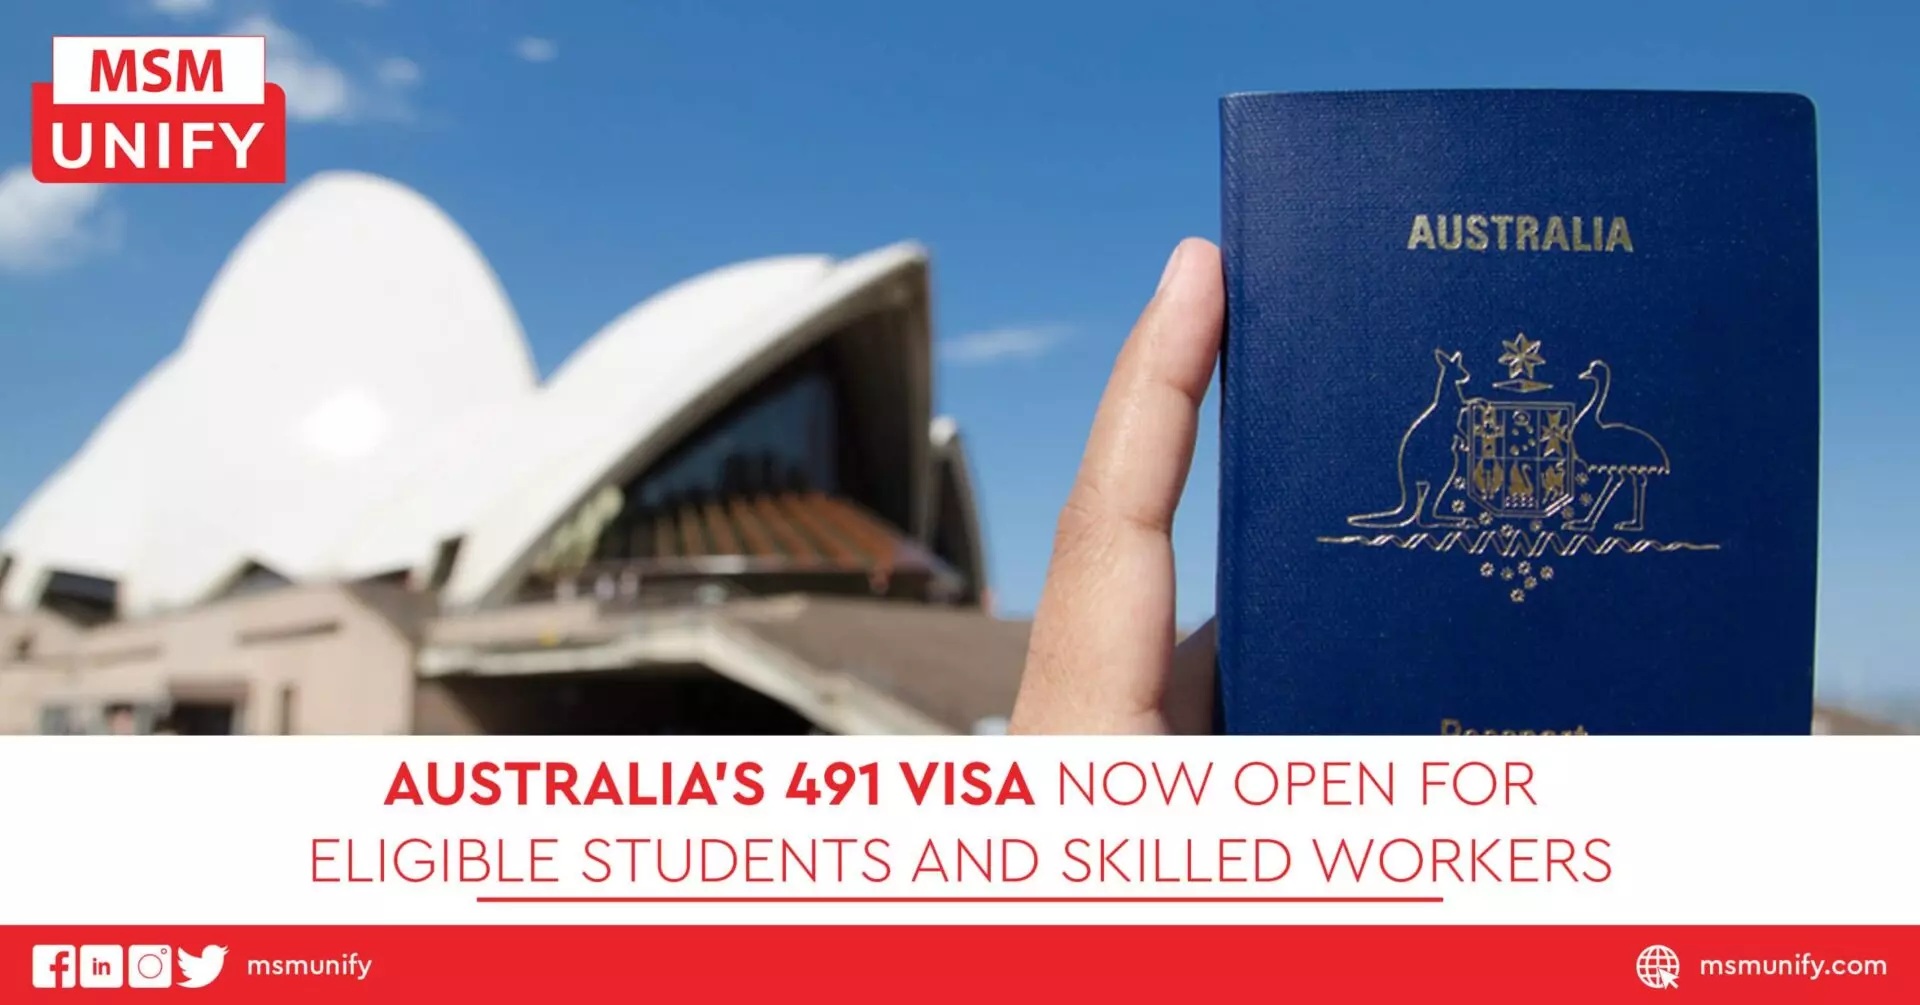 Australias 491 Visa Now Open for Eligible Students and Skilled Workers scaled 1